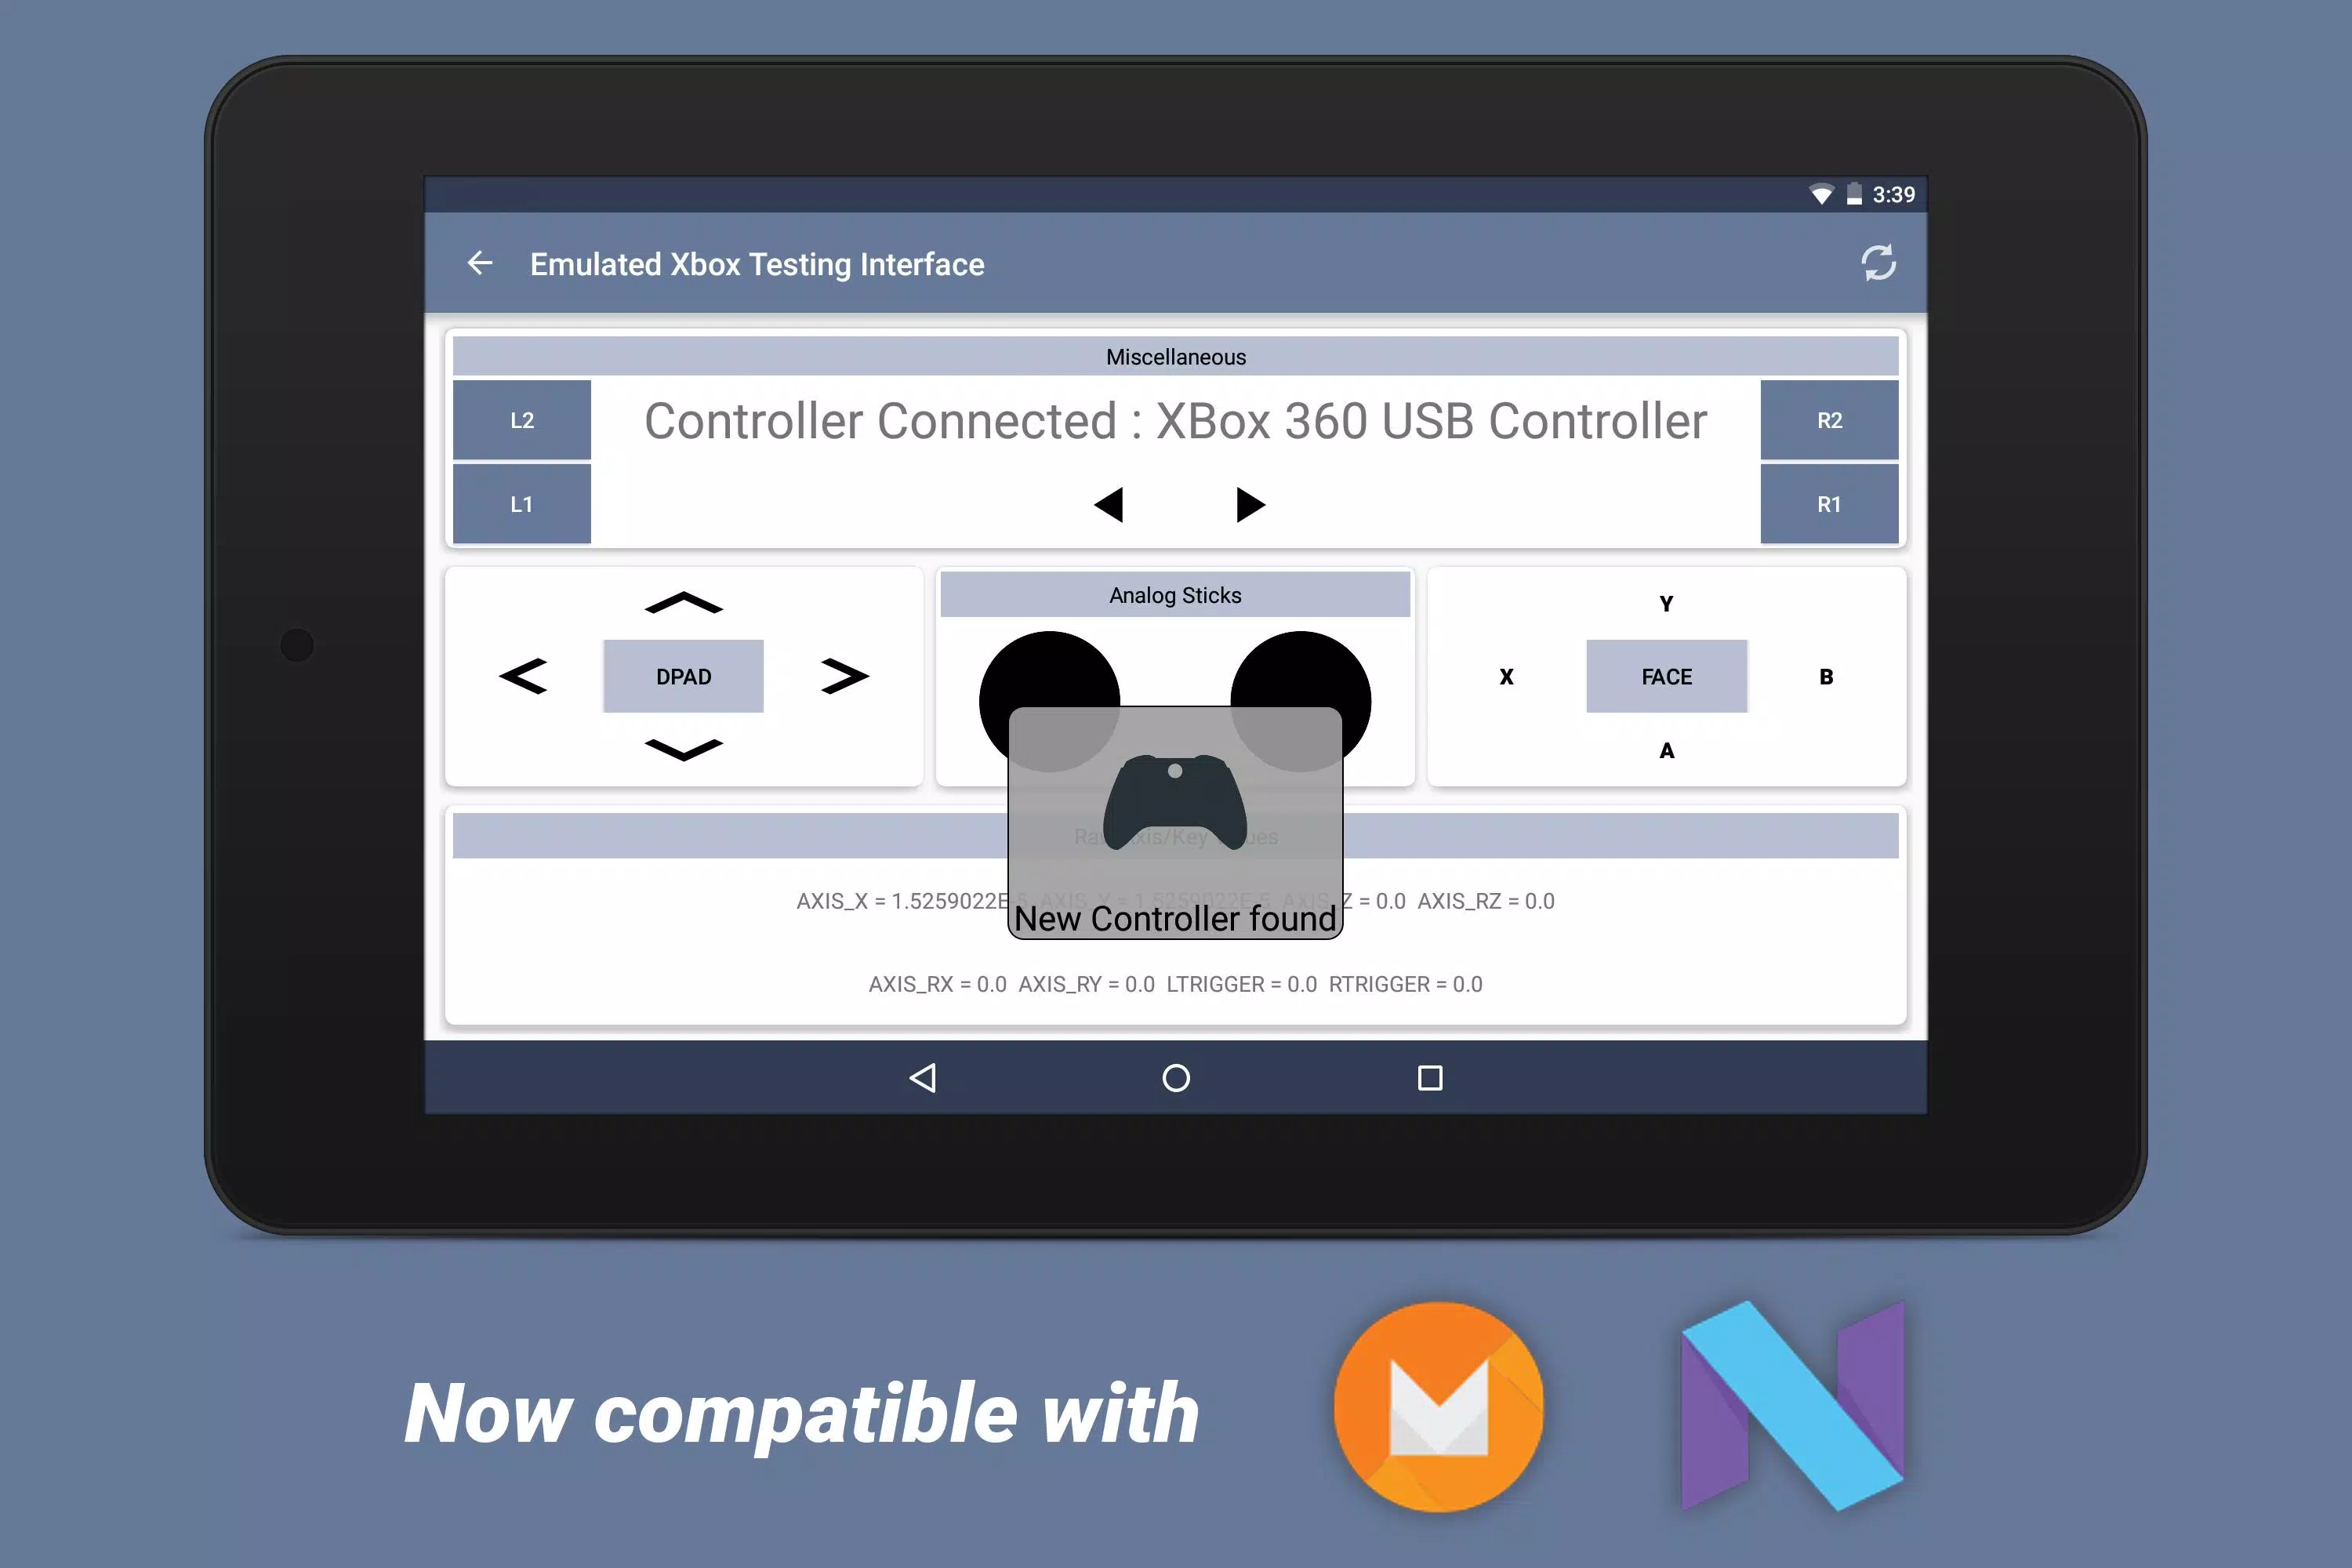 Game Controller KeyMapper APK for Android Download